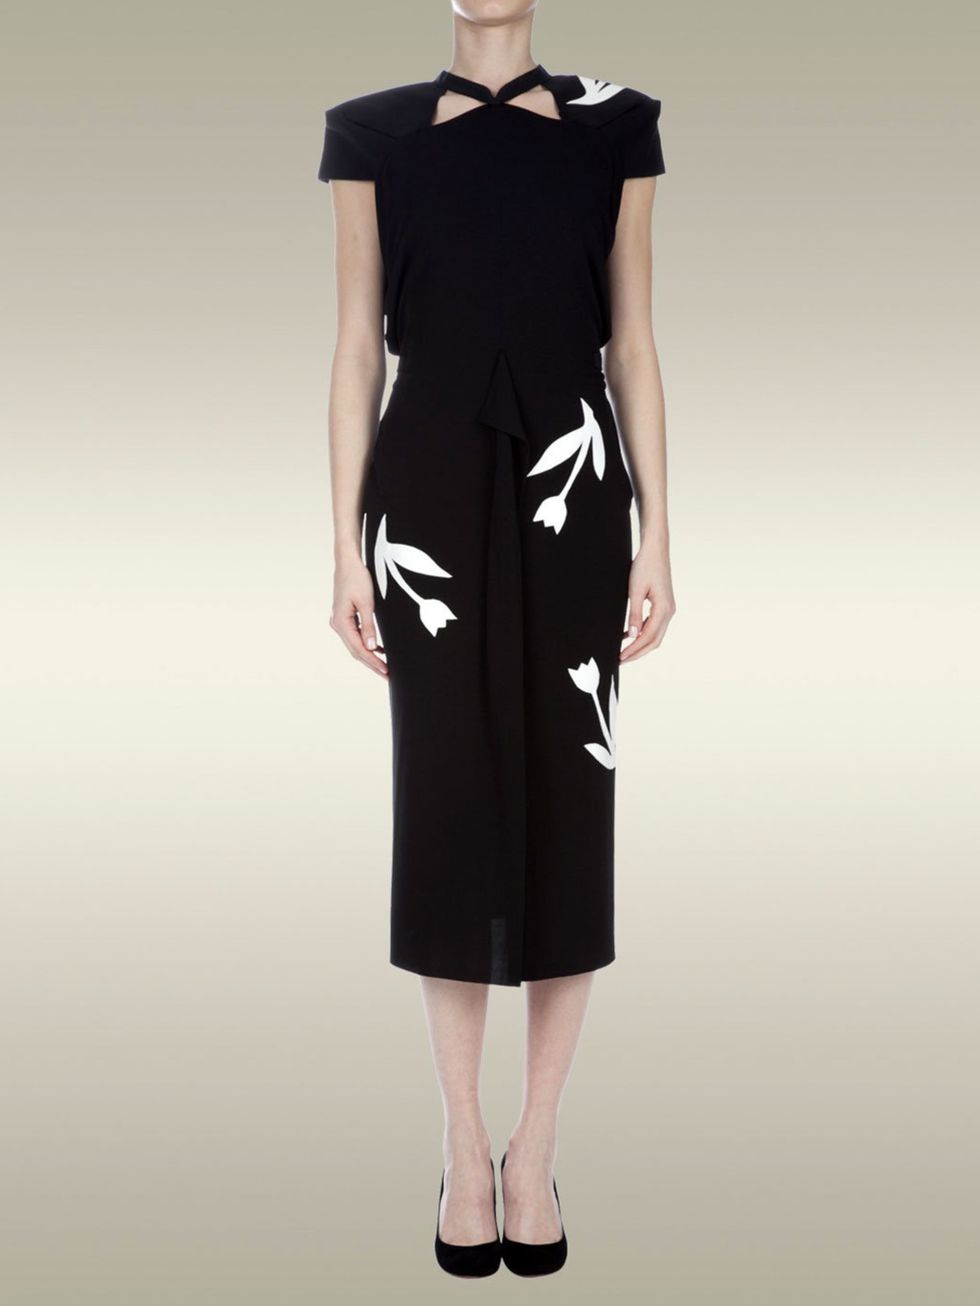 <p>Roland Mouret's limited-edition Carstone dress.</p>